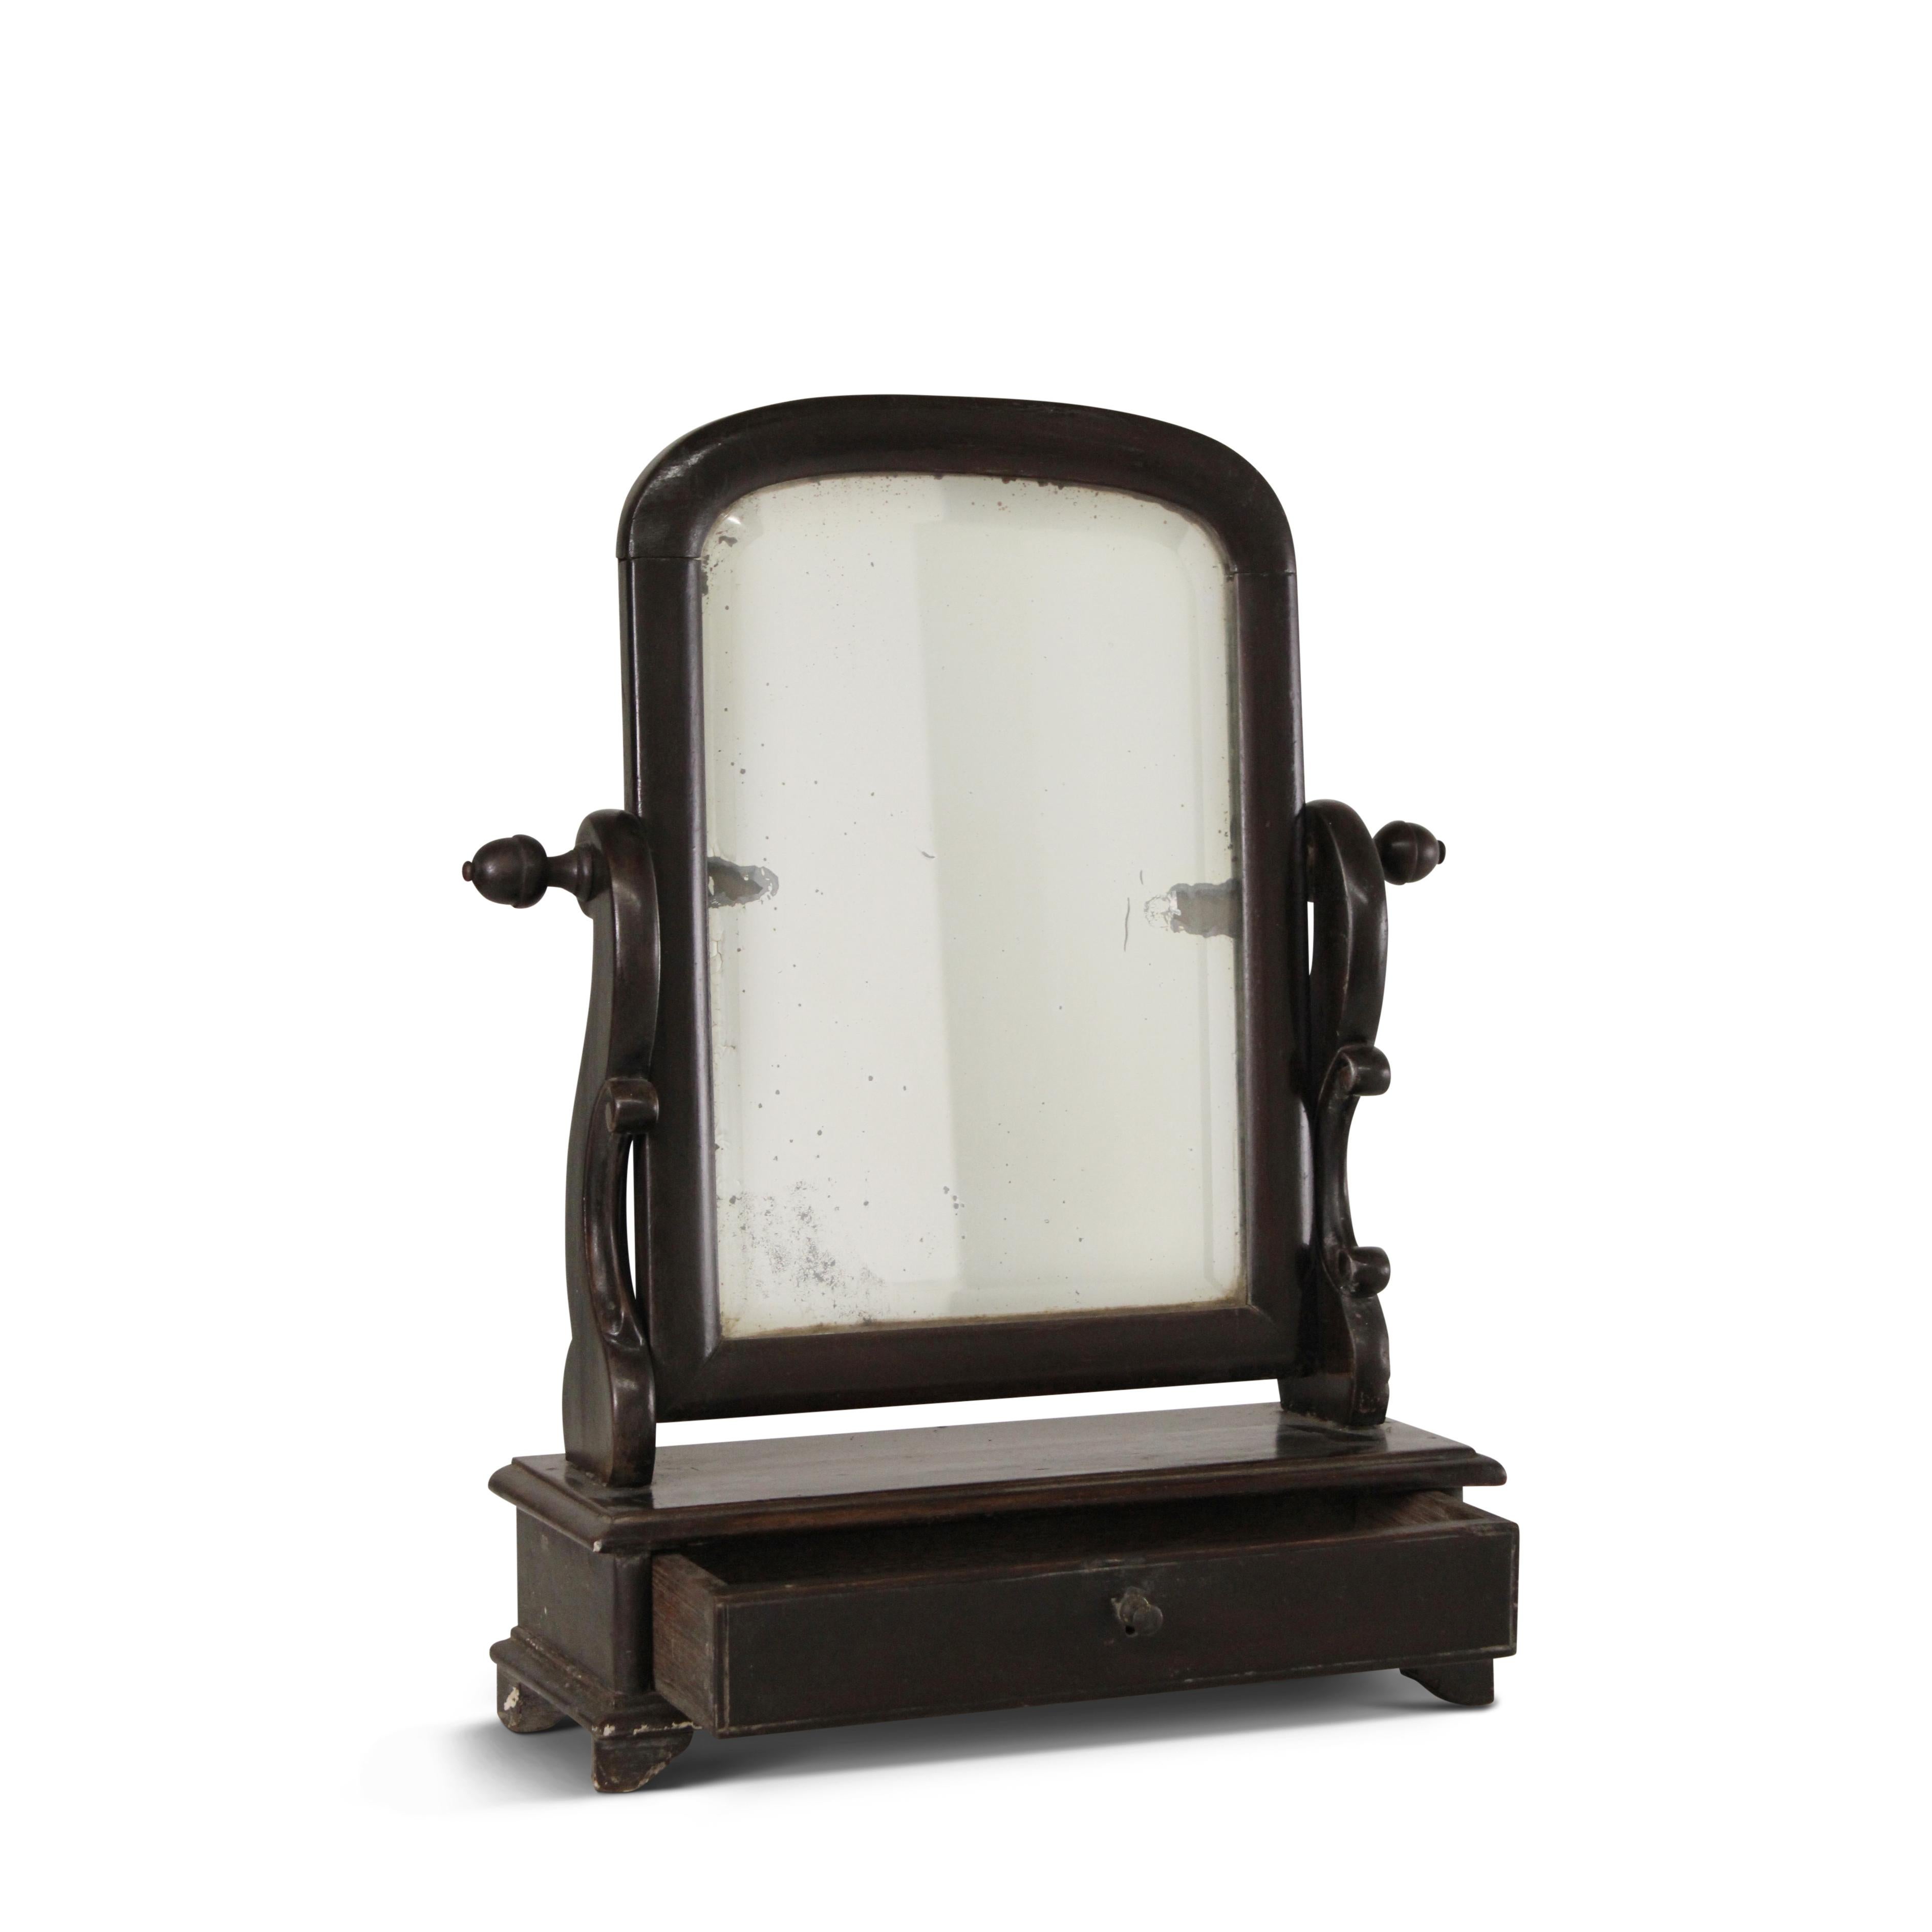 A charming teak tabletop vanity mirror with scrolled side supports, original arched top mirror frame and a drawer at the bottom. The mirror surface reveals the passage of time with a graceful patina.